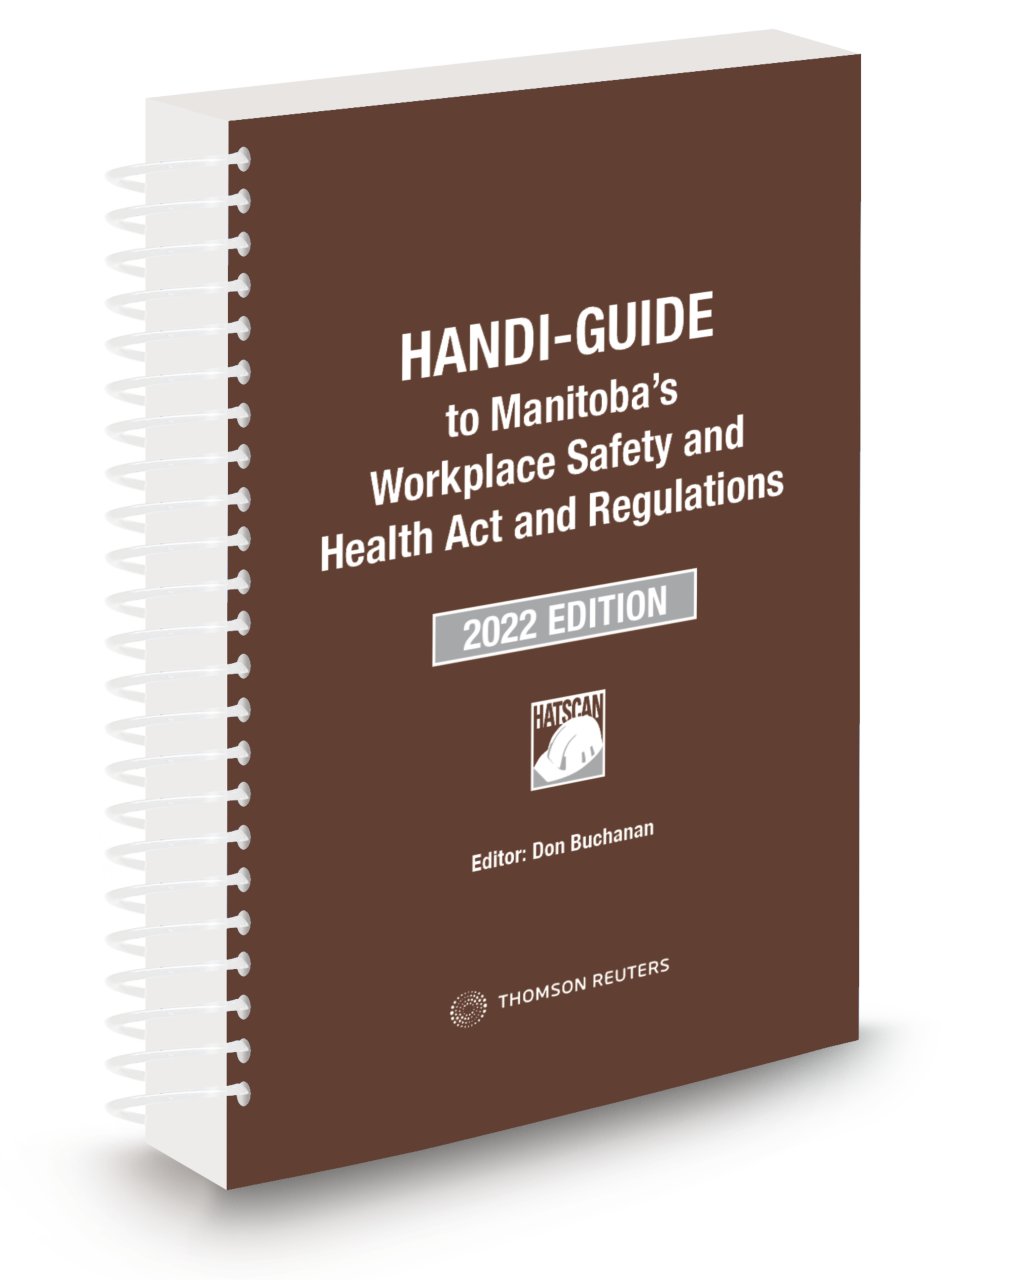 Image of the HANDI-GUIDE to Manitoba's Workplace Safety and Health Act and Regulations, 2022 Edition.